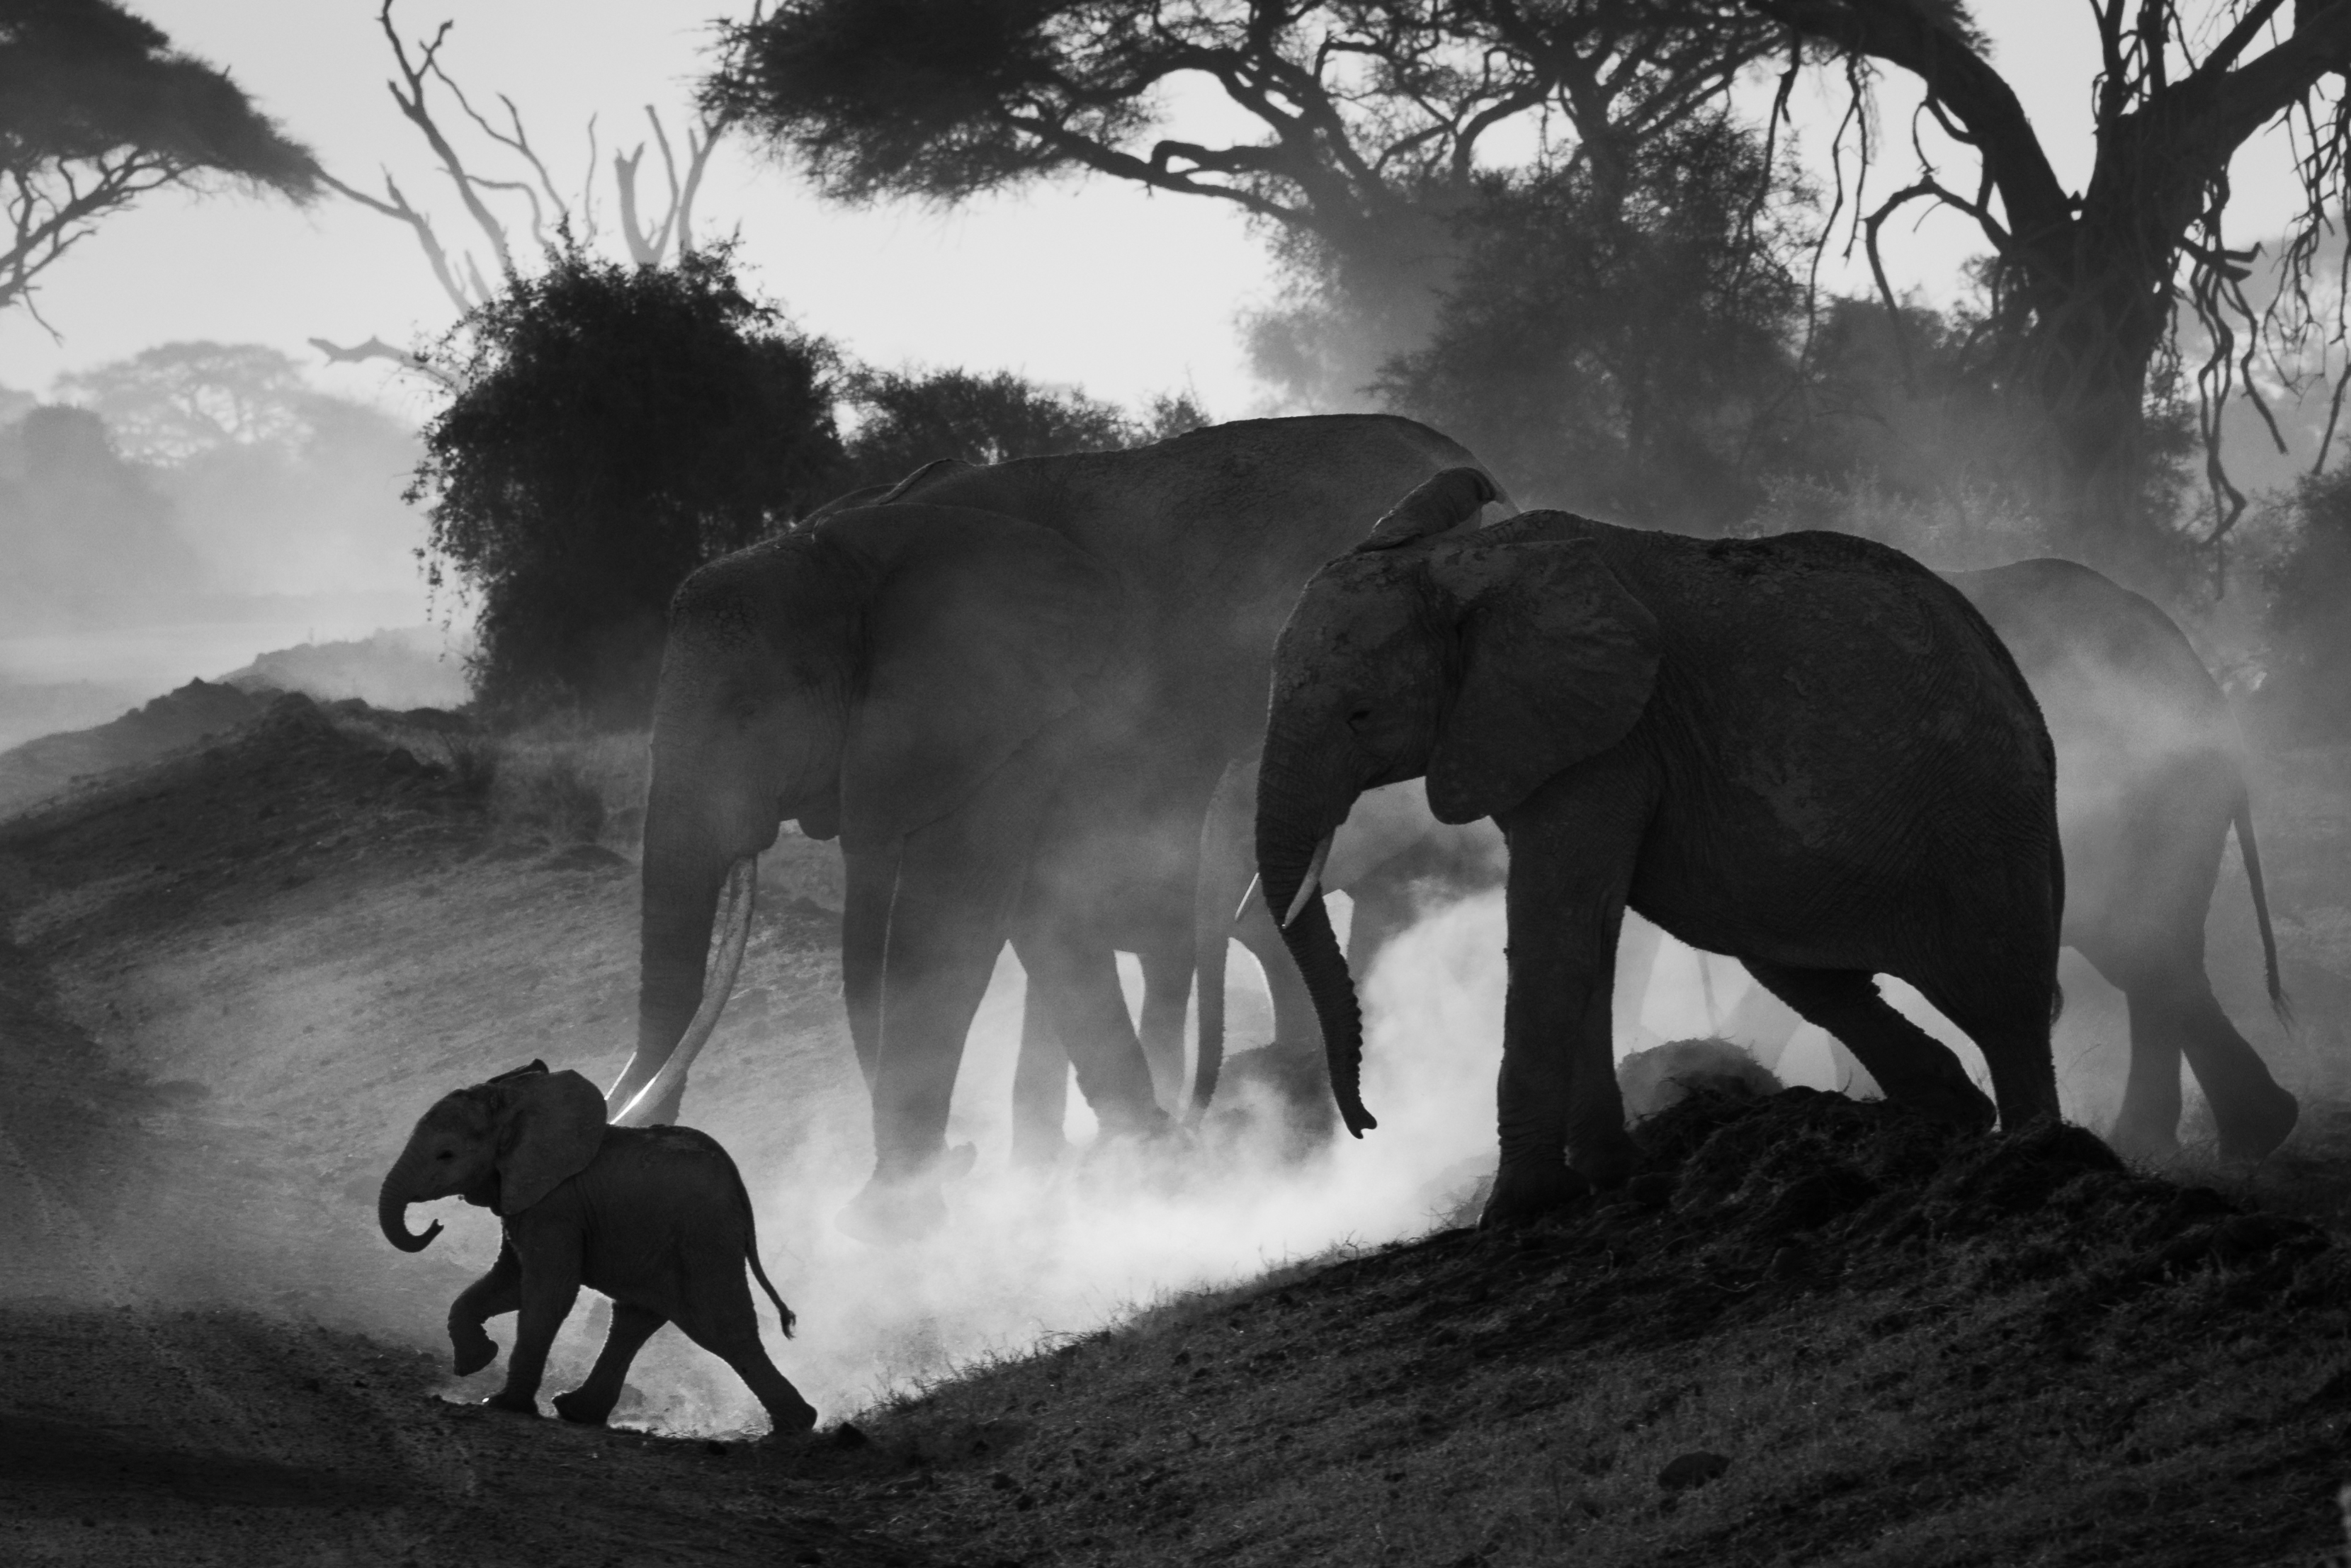 This little elephant managed to escape from its mother for a short couple of seconds, proudly leading the family and making a lot of dust with its tiny legs.